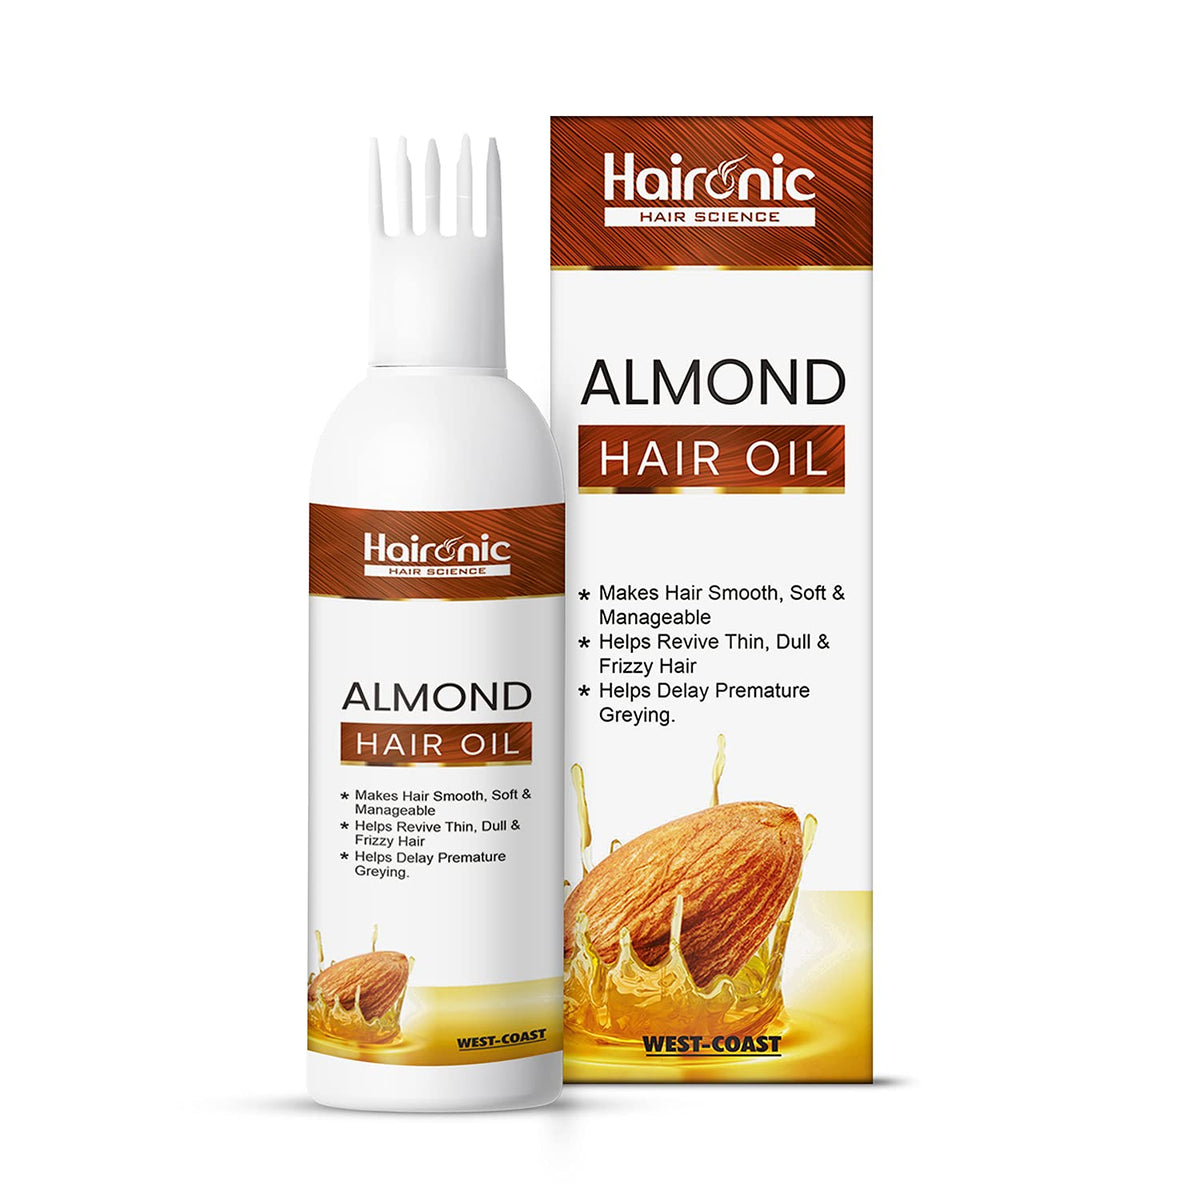 Haironic Hair Science Almond Hair Oil | Makes Hair Smooth, Soft & Manageable, Helps Revive Thin, Dull & Frizzy Hair | Suitable For All Hair Types - 100ml (Pack of 5)